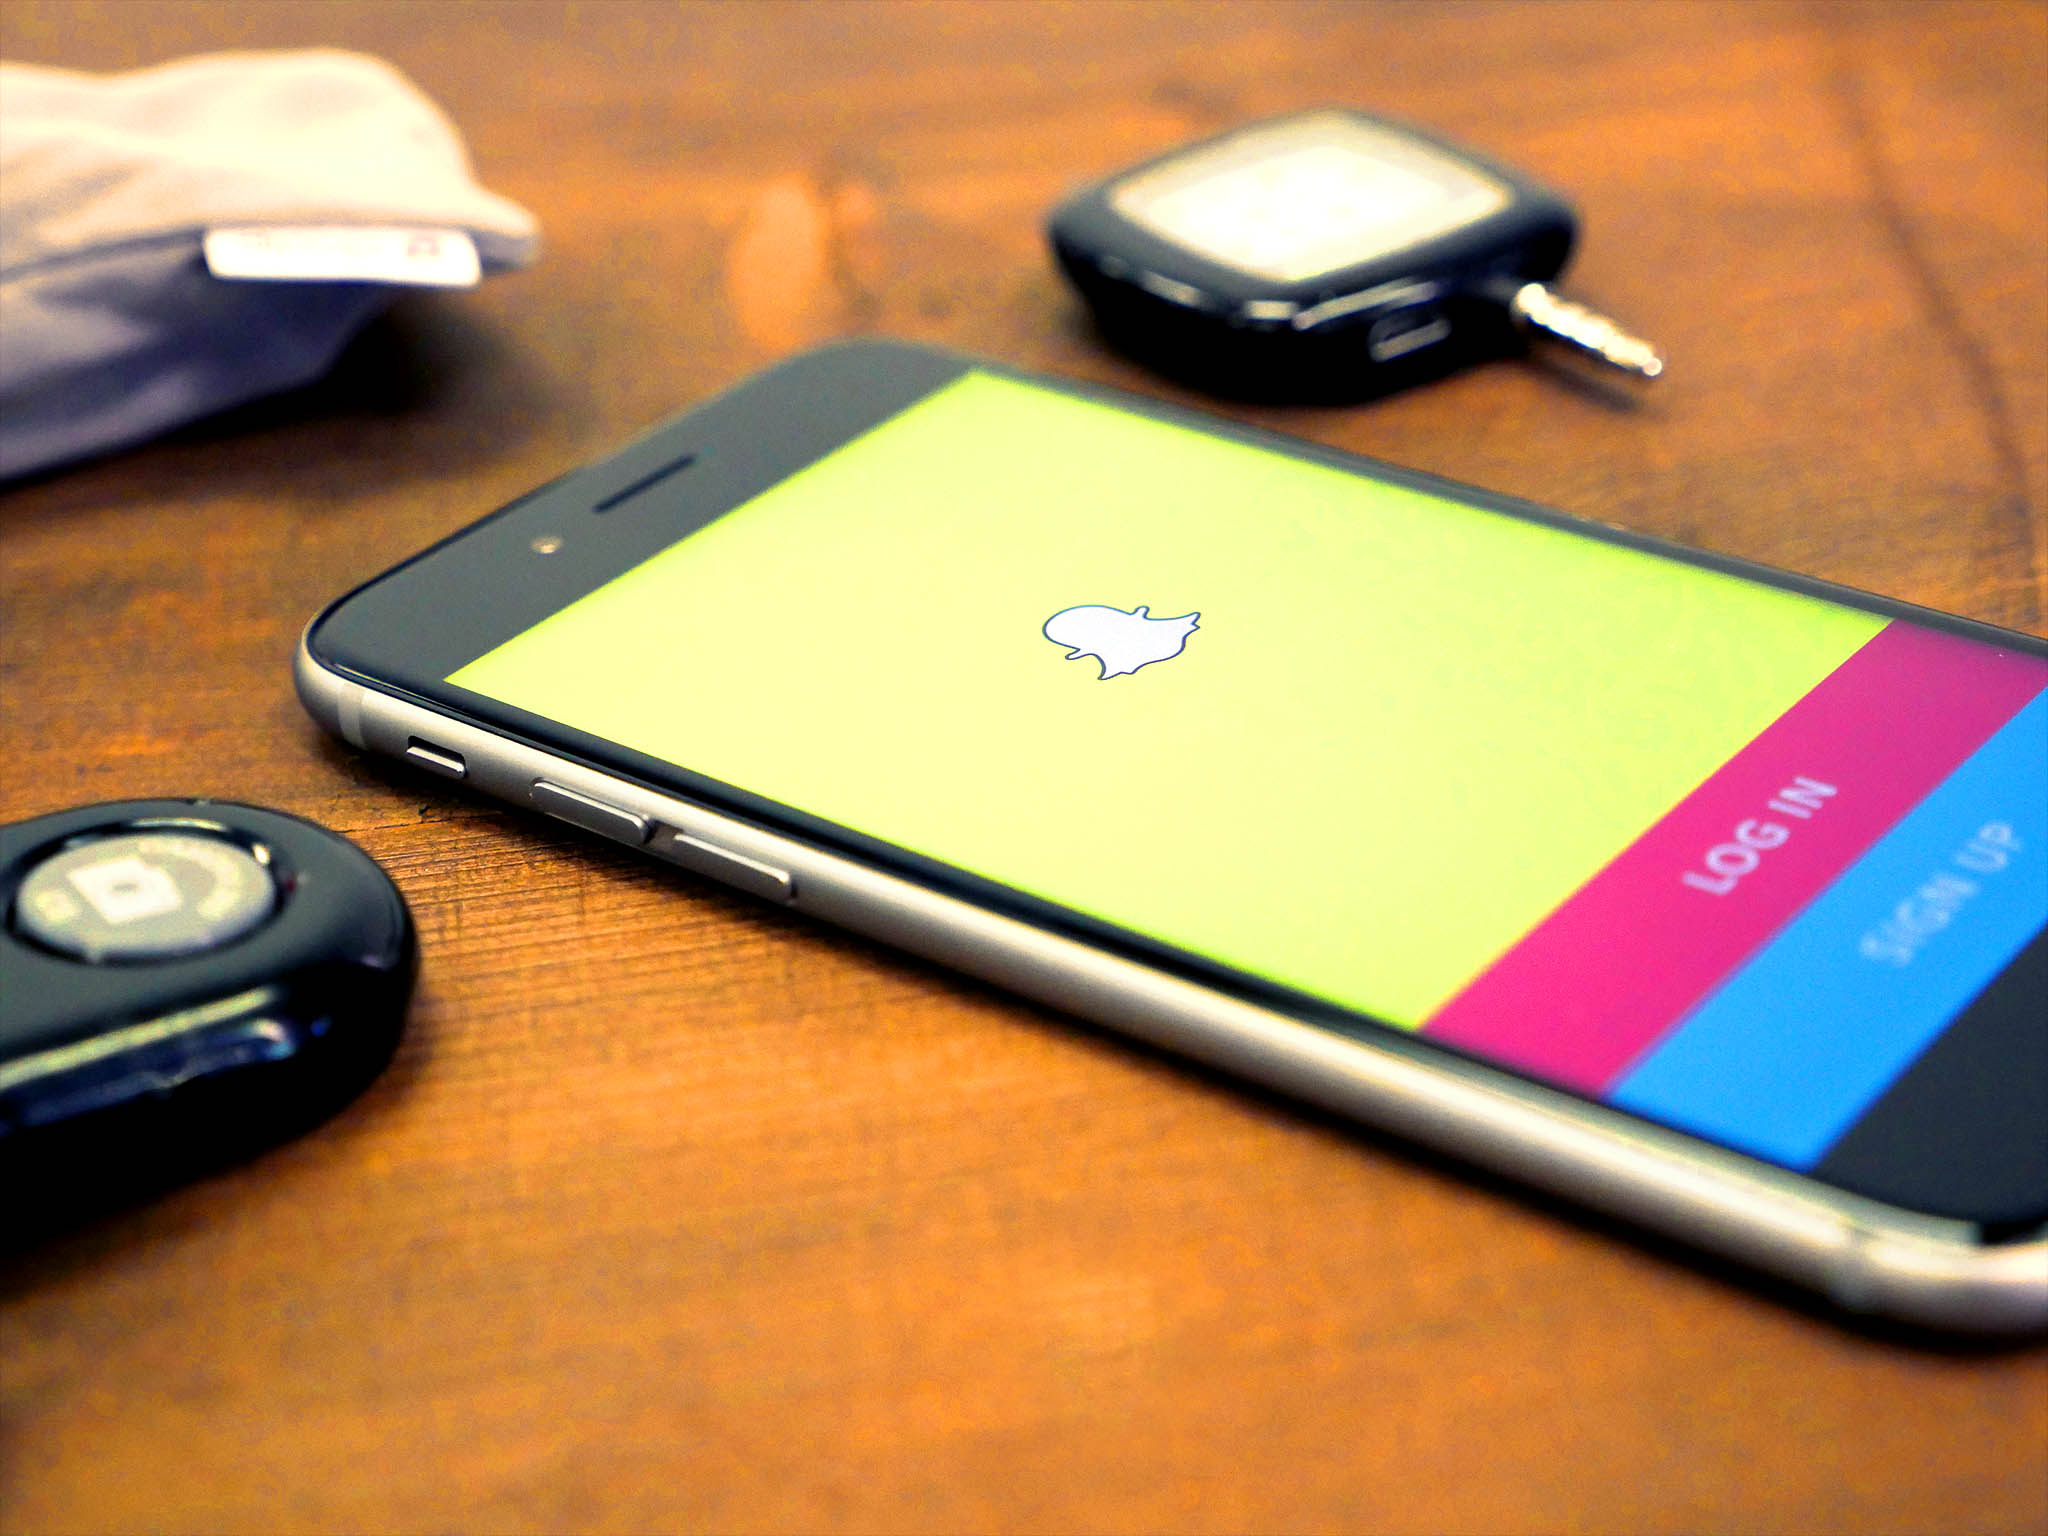 Snapchat: 10 tips, tricks and cheats for next level snaps!